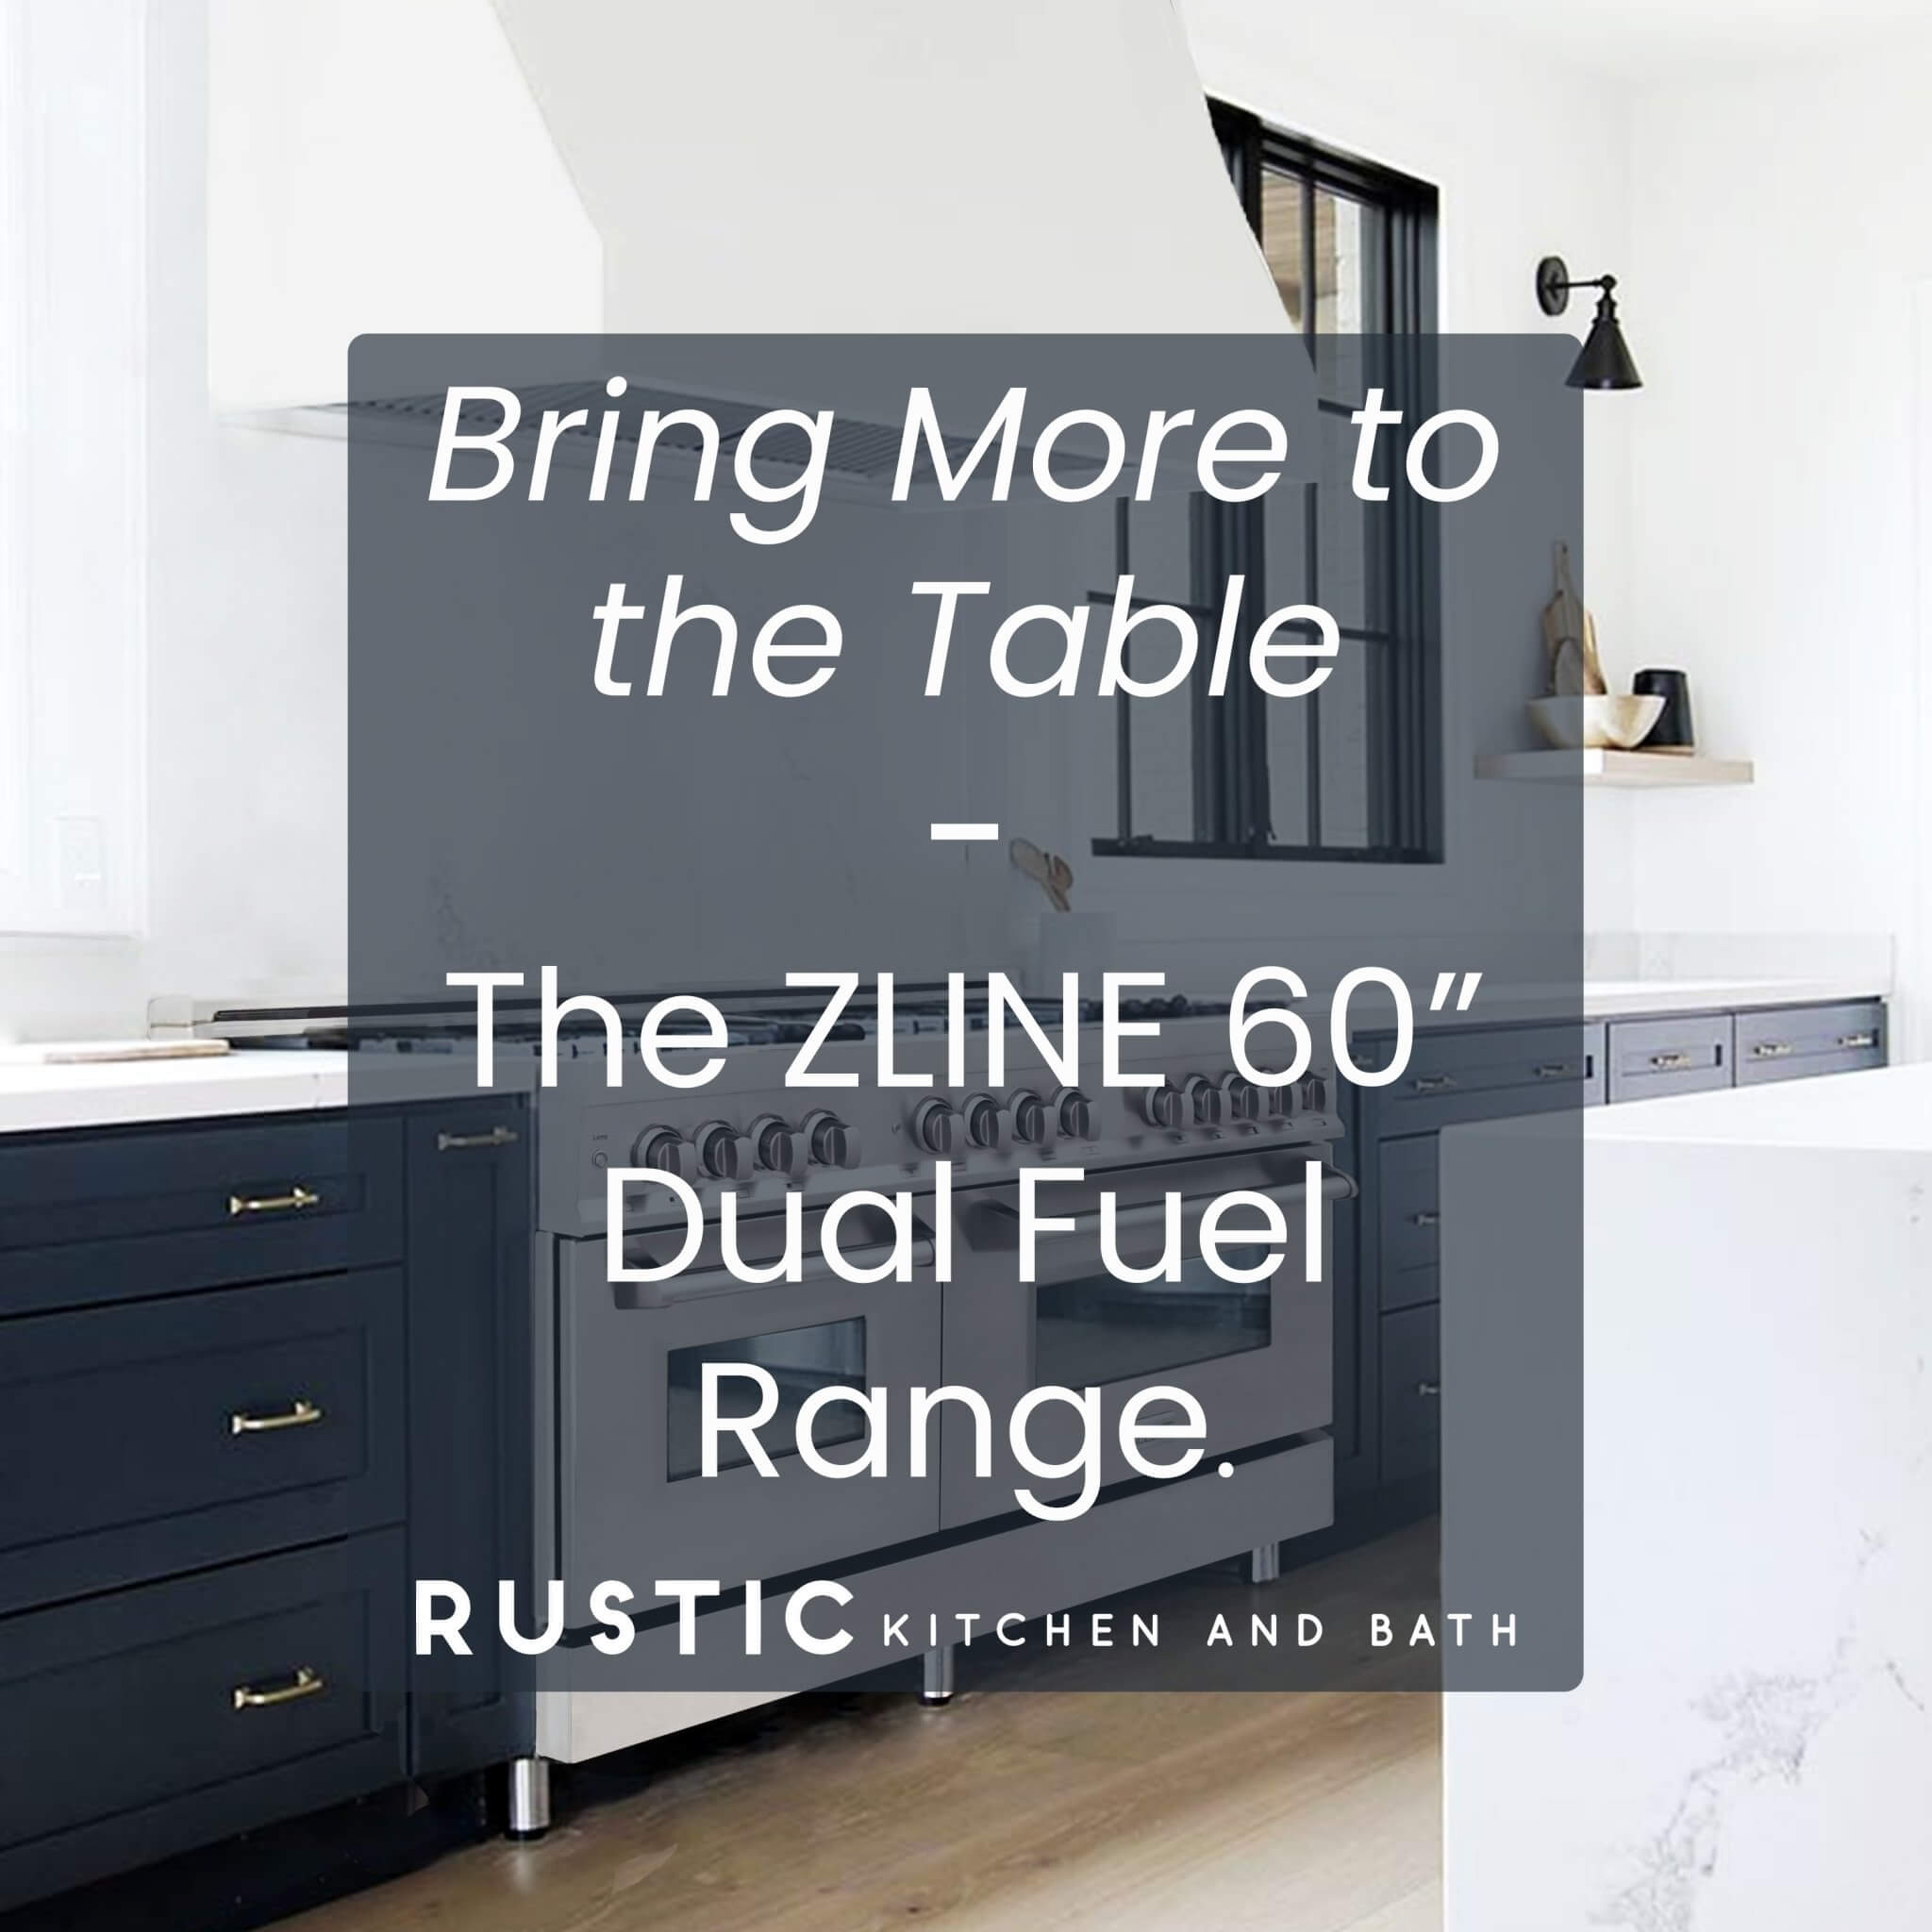 Bring More to the Table - The ZLINE 60” Dual Fuel Range